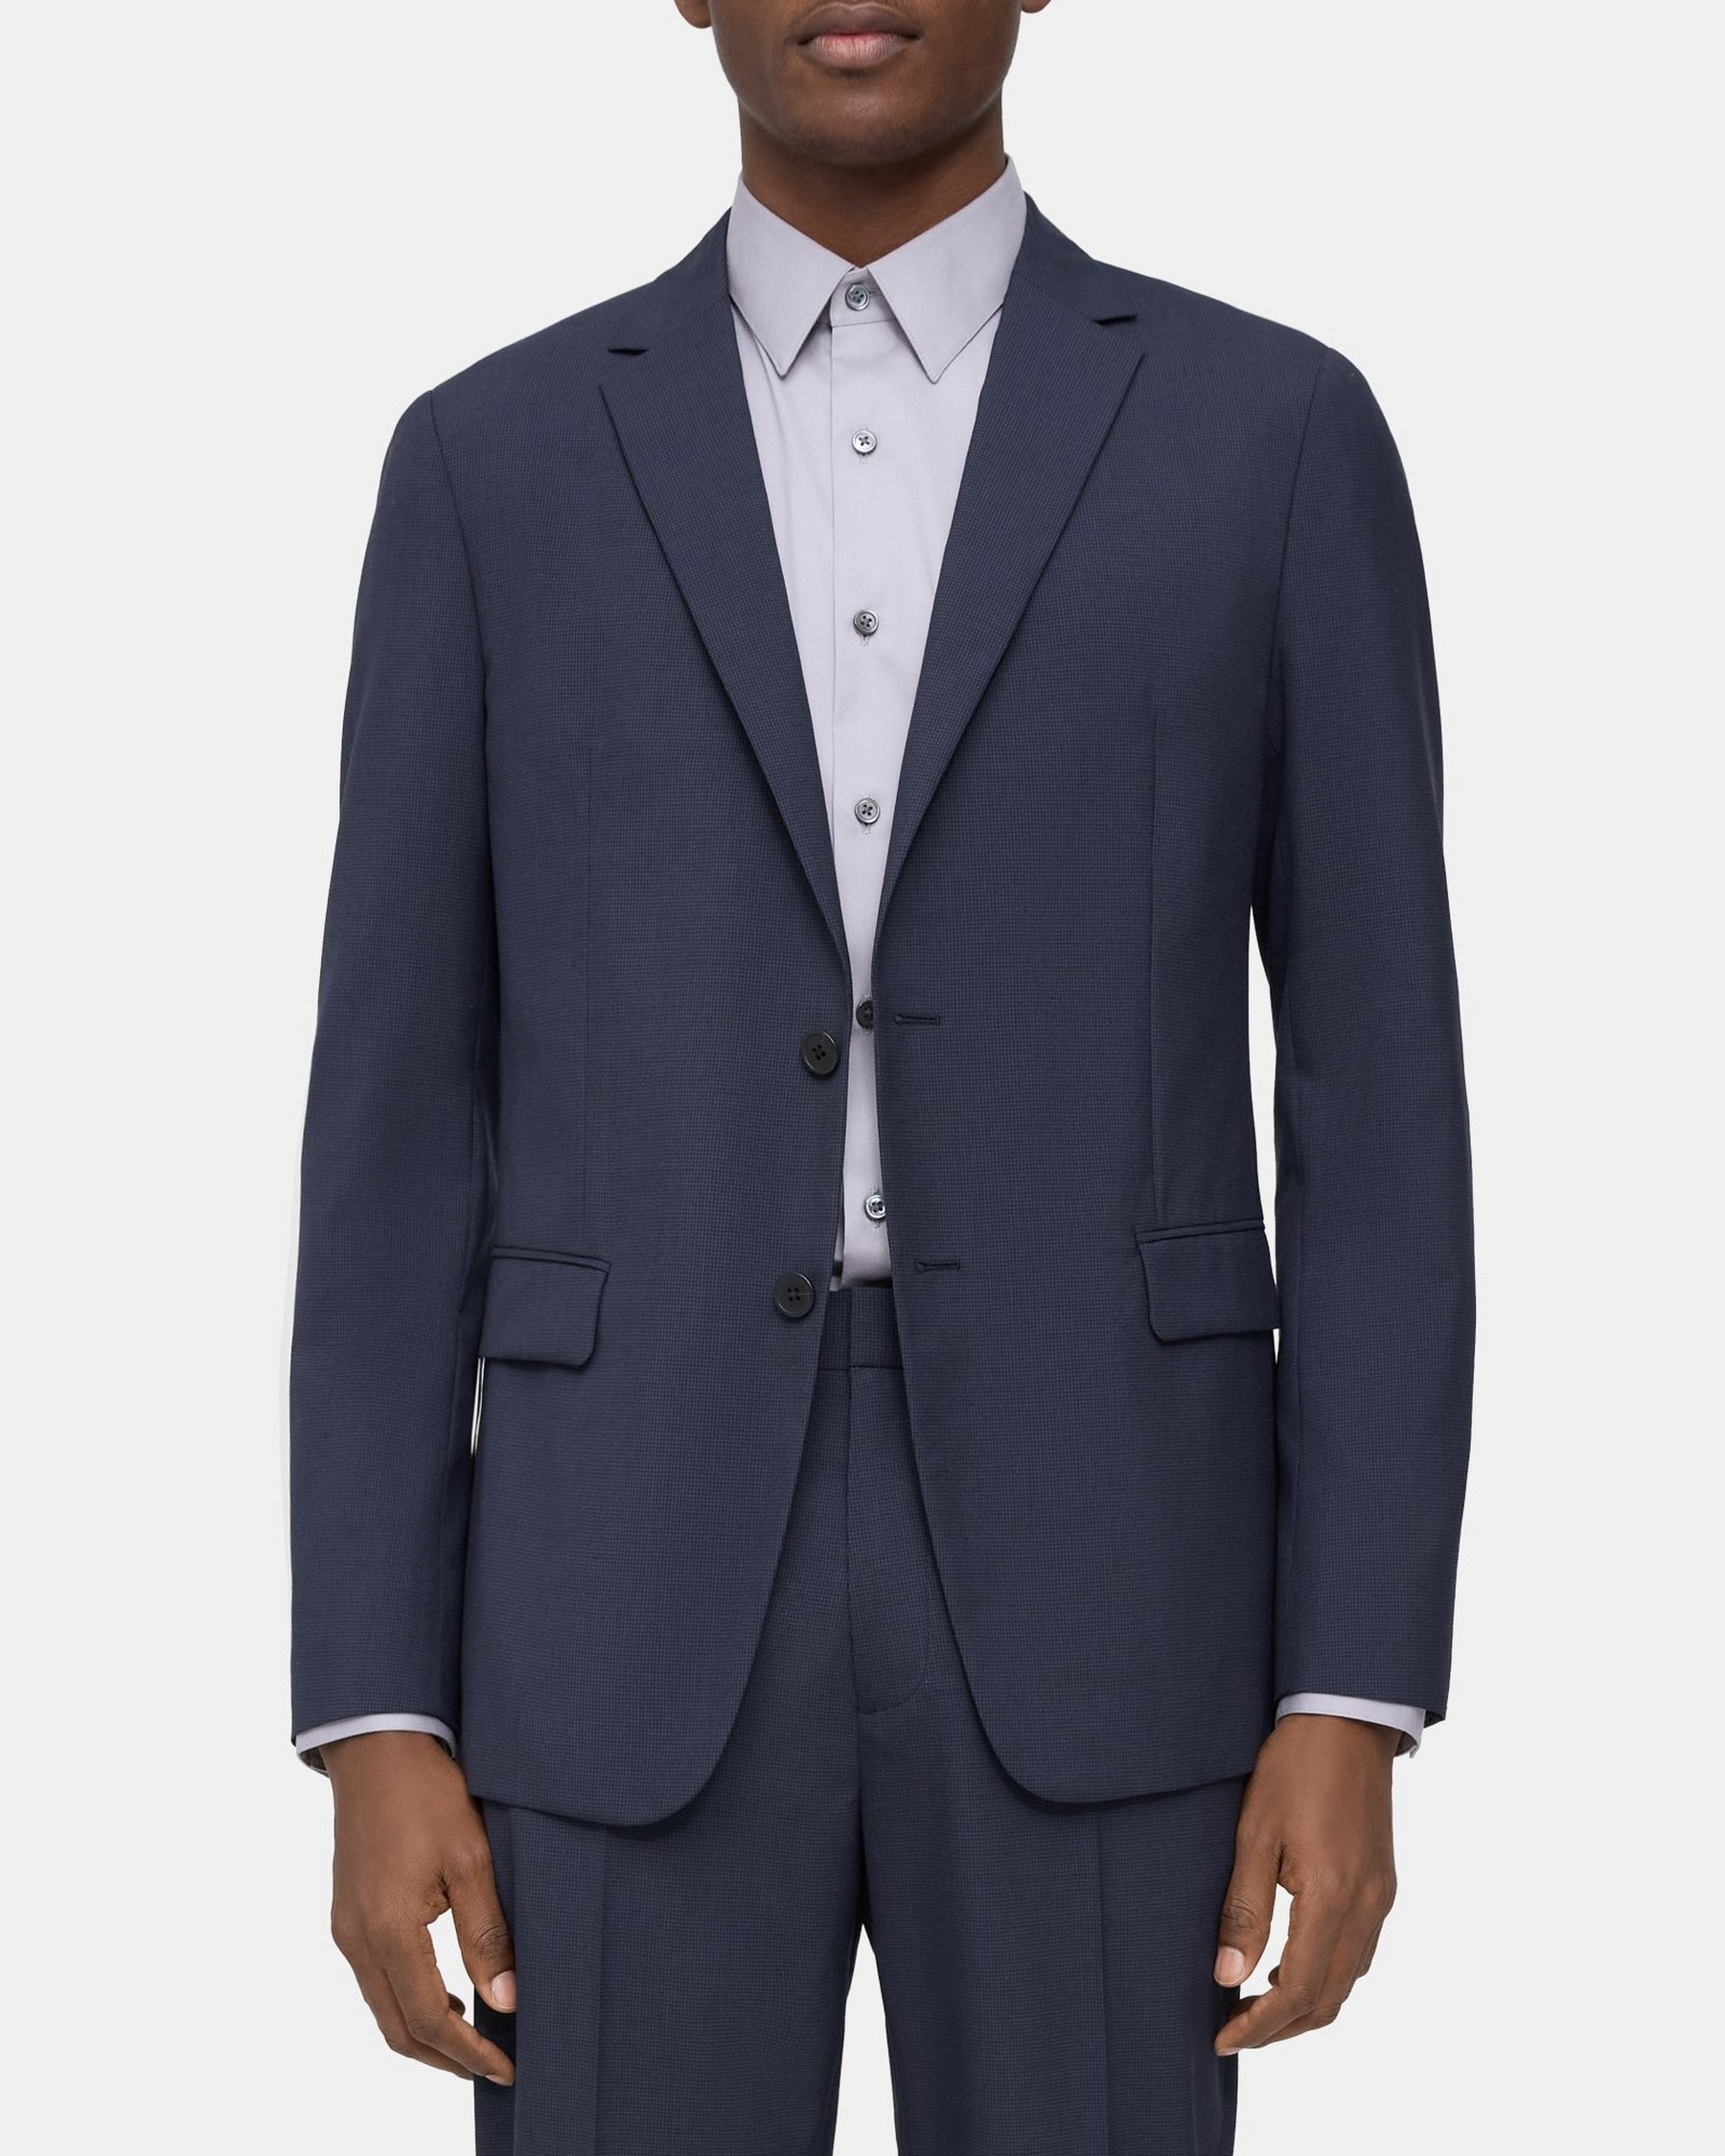 Unstructured Suit Jacket in Houndstooth Wool Blend